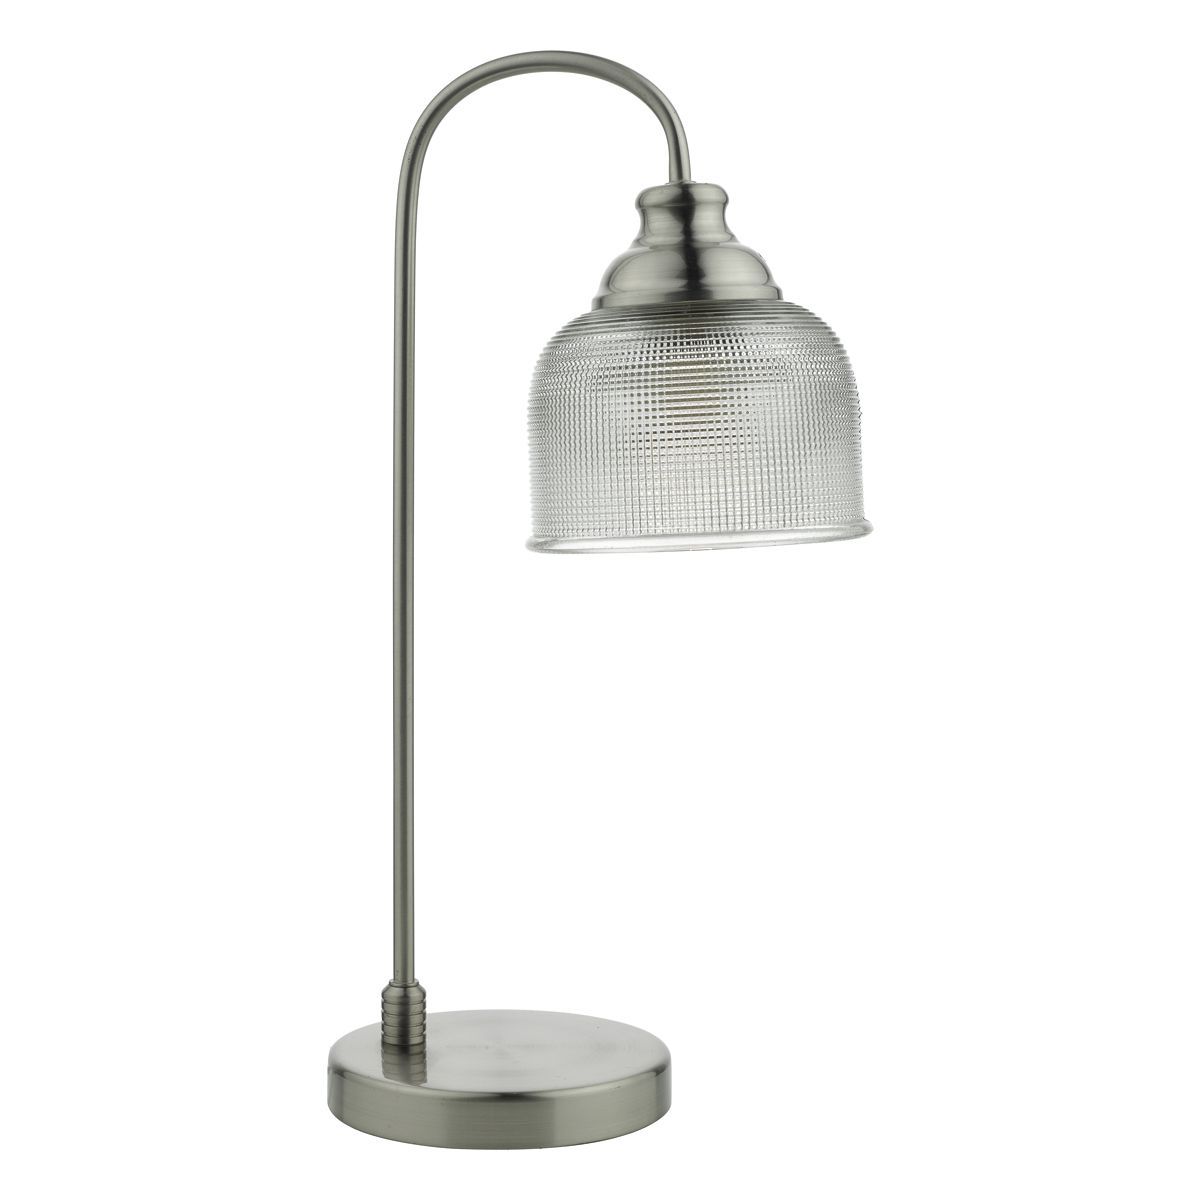 Hector Touch Table Lamp Satin Nickel Decorative Glass Regarding Glass Satin Nickel Floor Lamps (View 17 of 20)